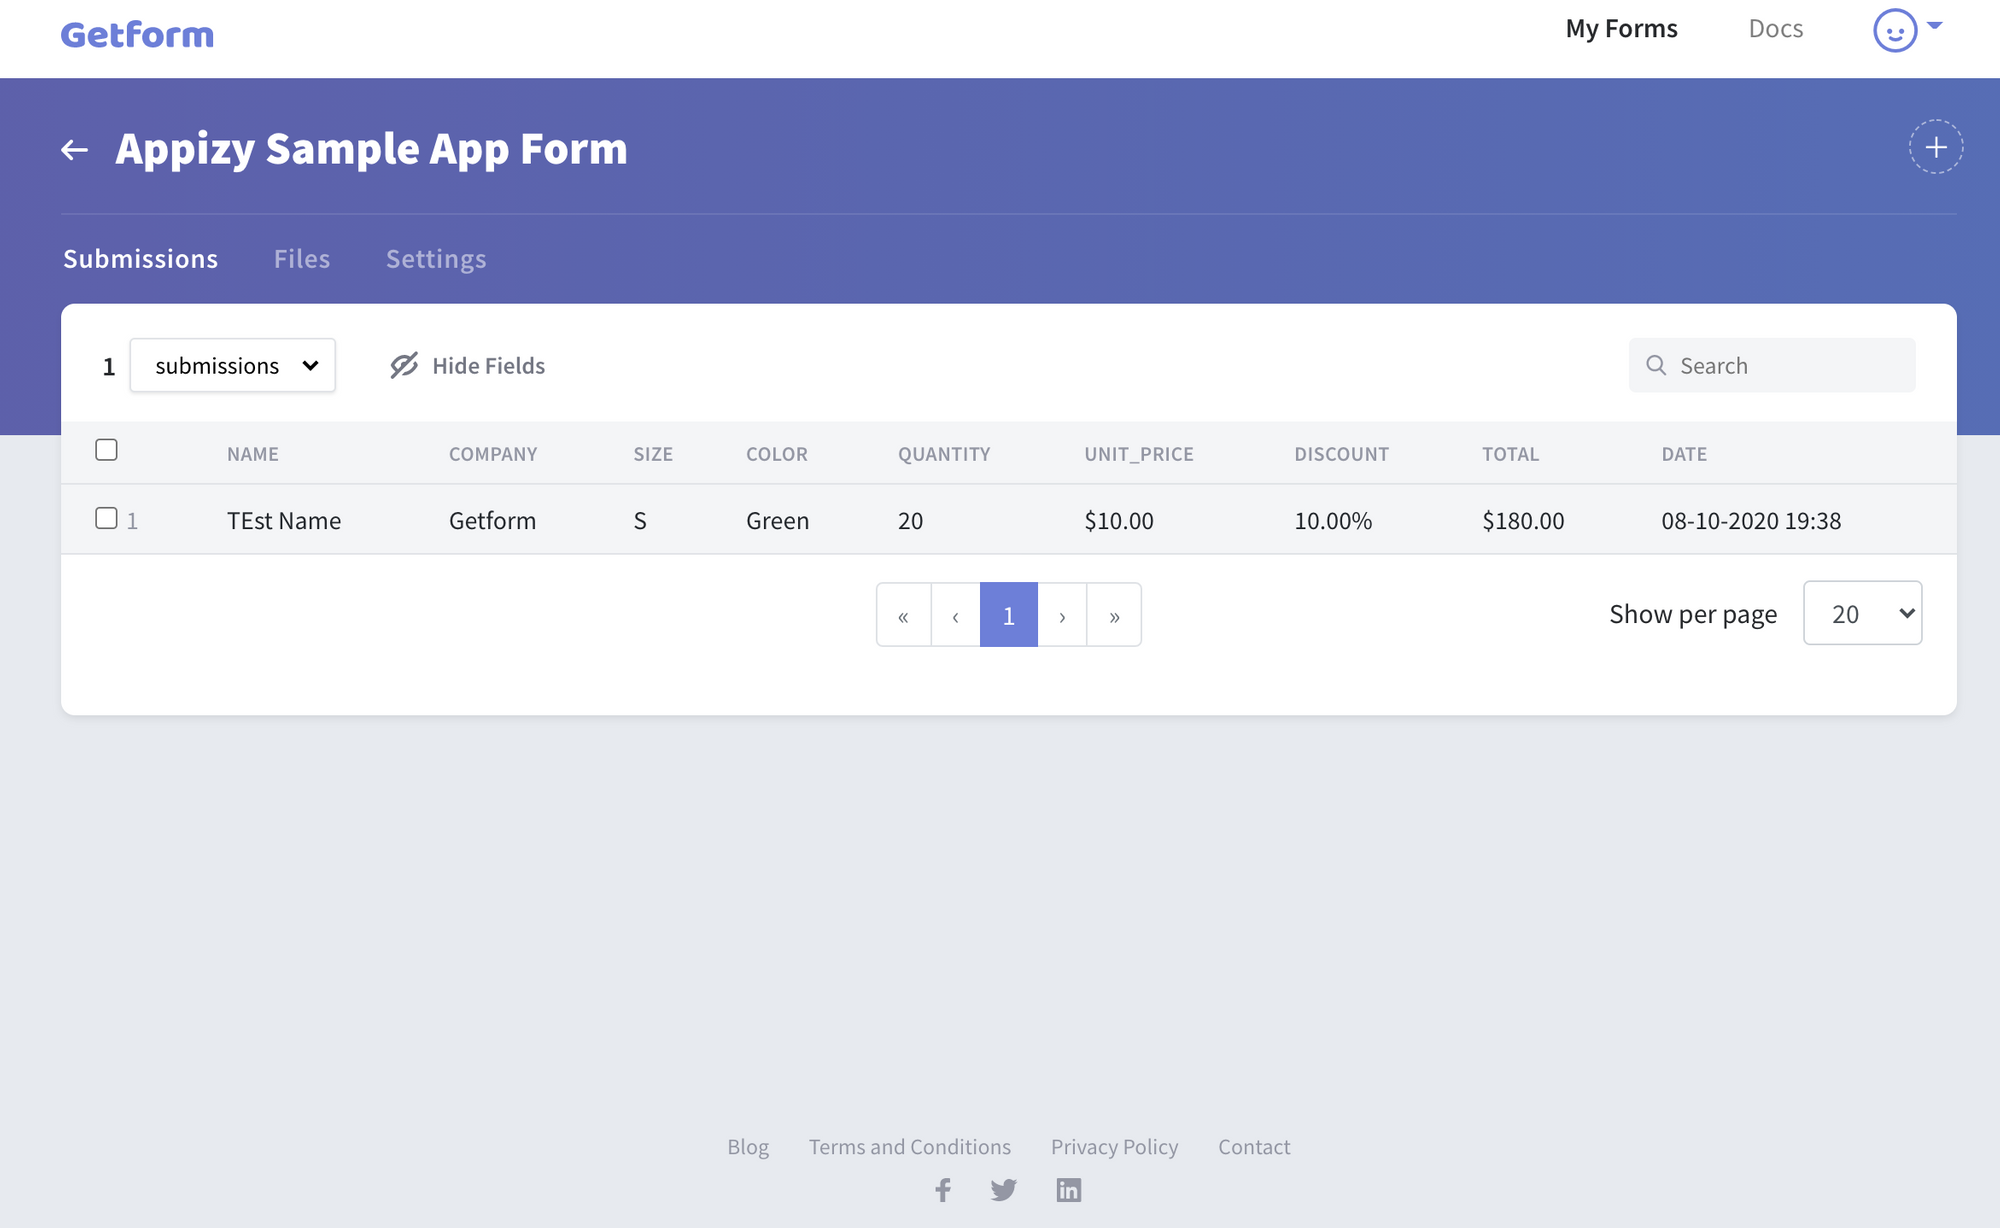 How to build an interactive form using Getform and Appizy